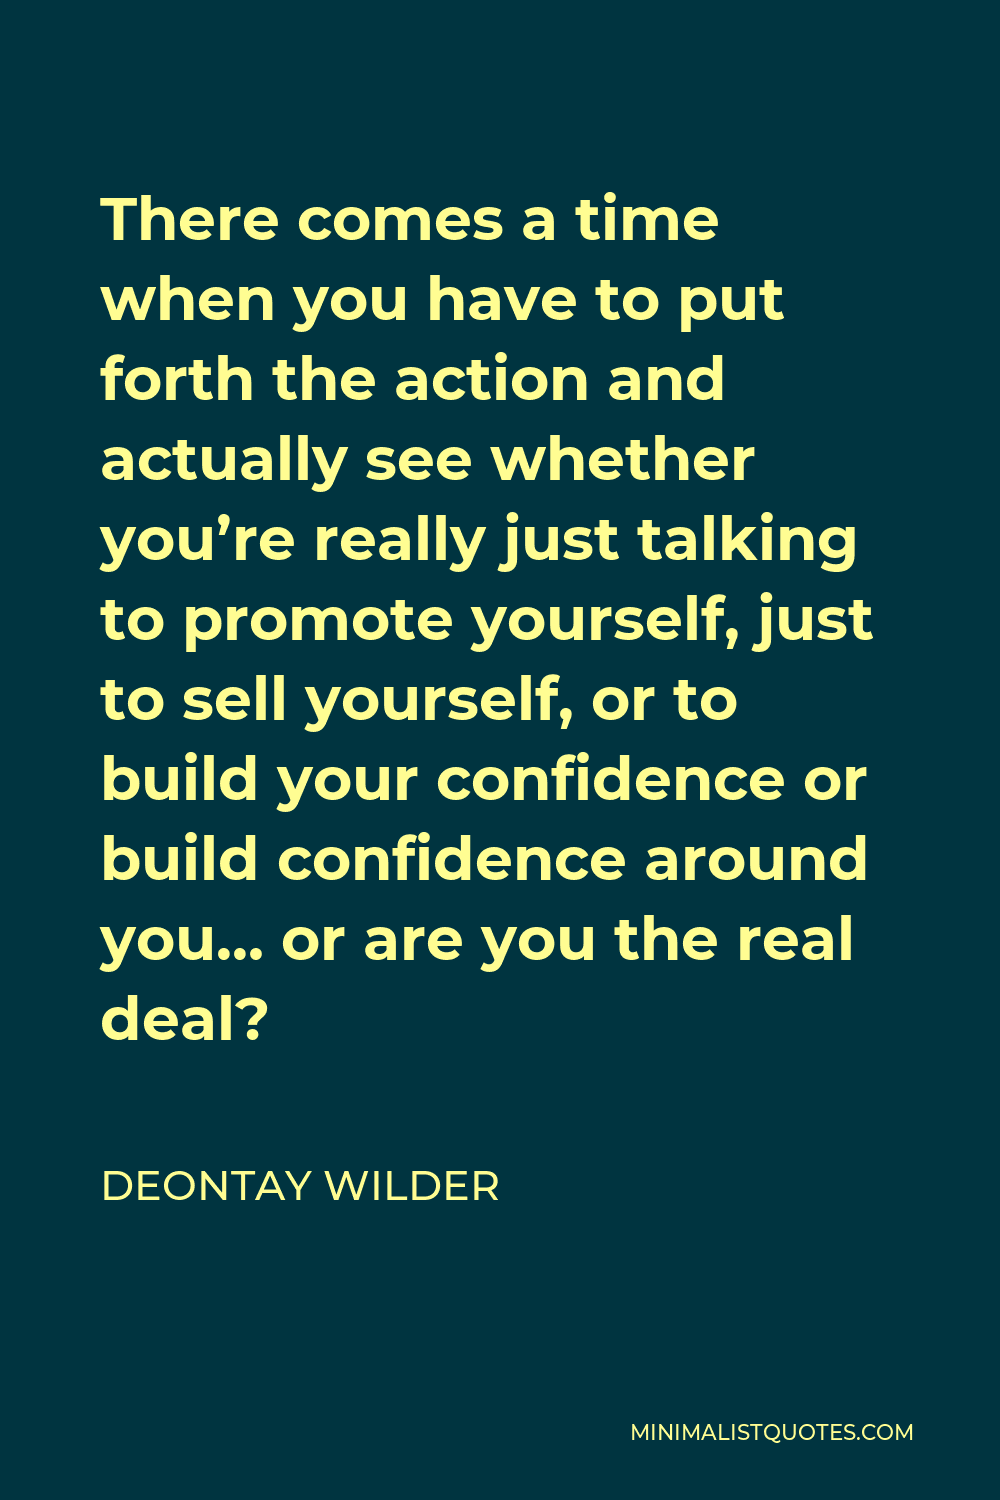 Deontay Wilder Quote - There comes a time when you have to put forth the action and actually see whether you’re really just talking to promote yourself, just to sell yourself, or to build your confidence or build confidence around you… or are you the real deal?